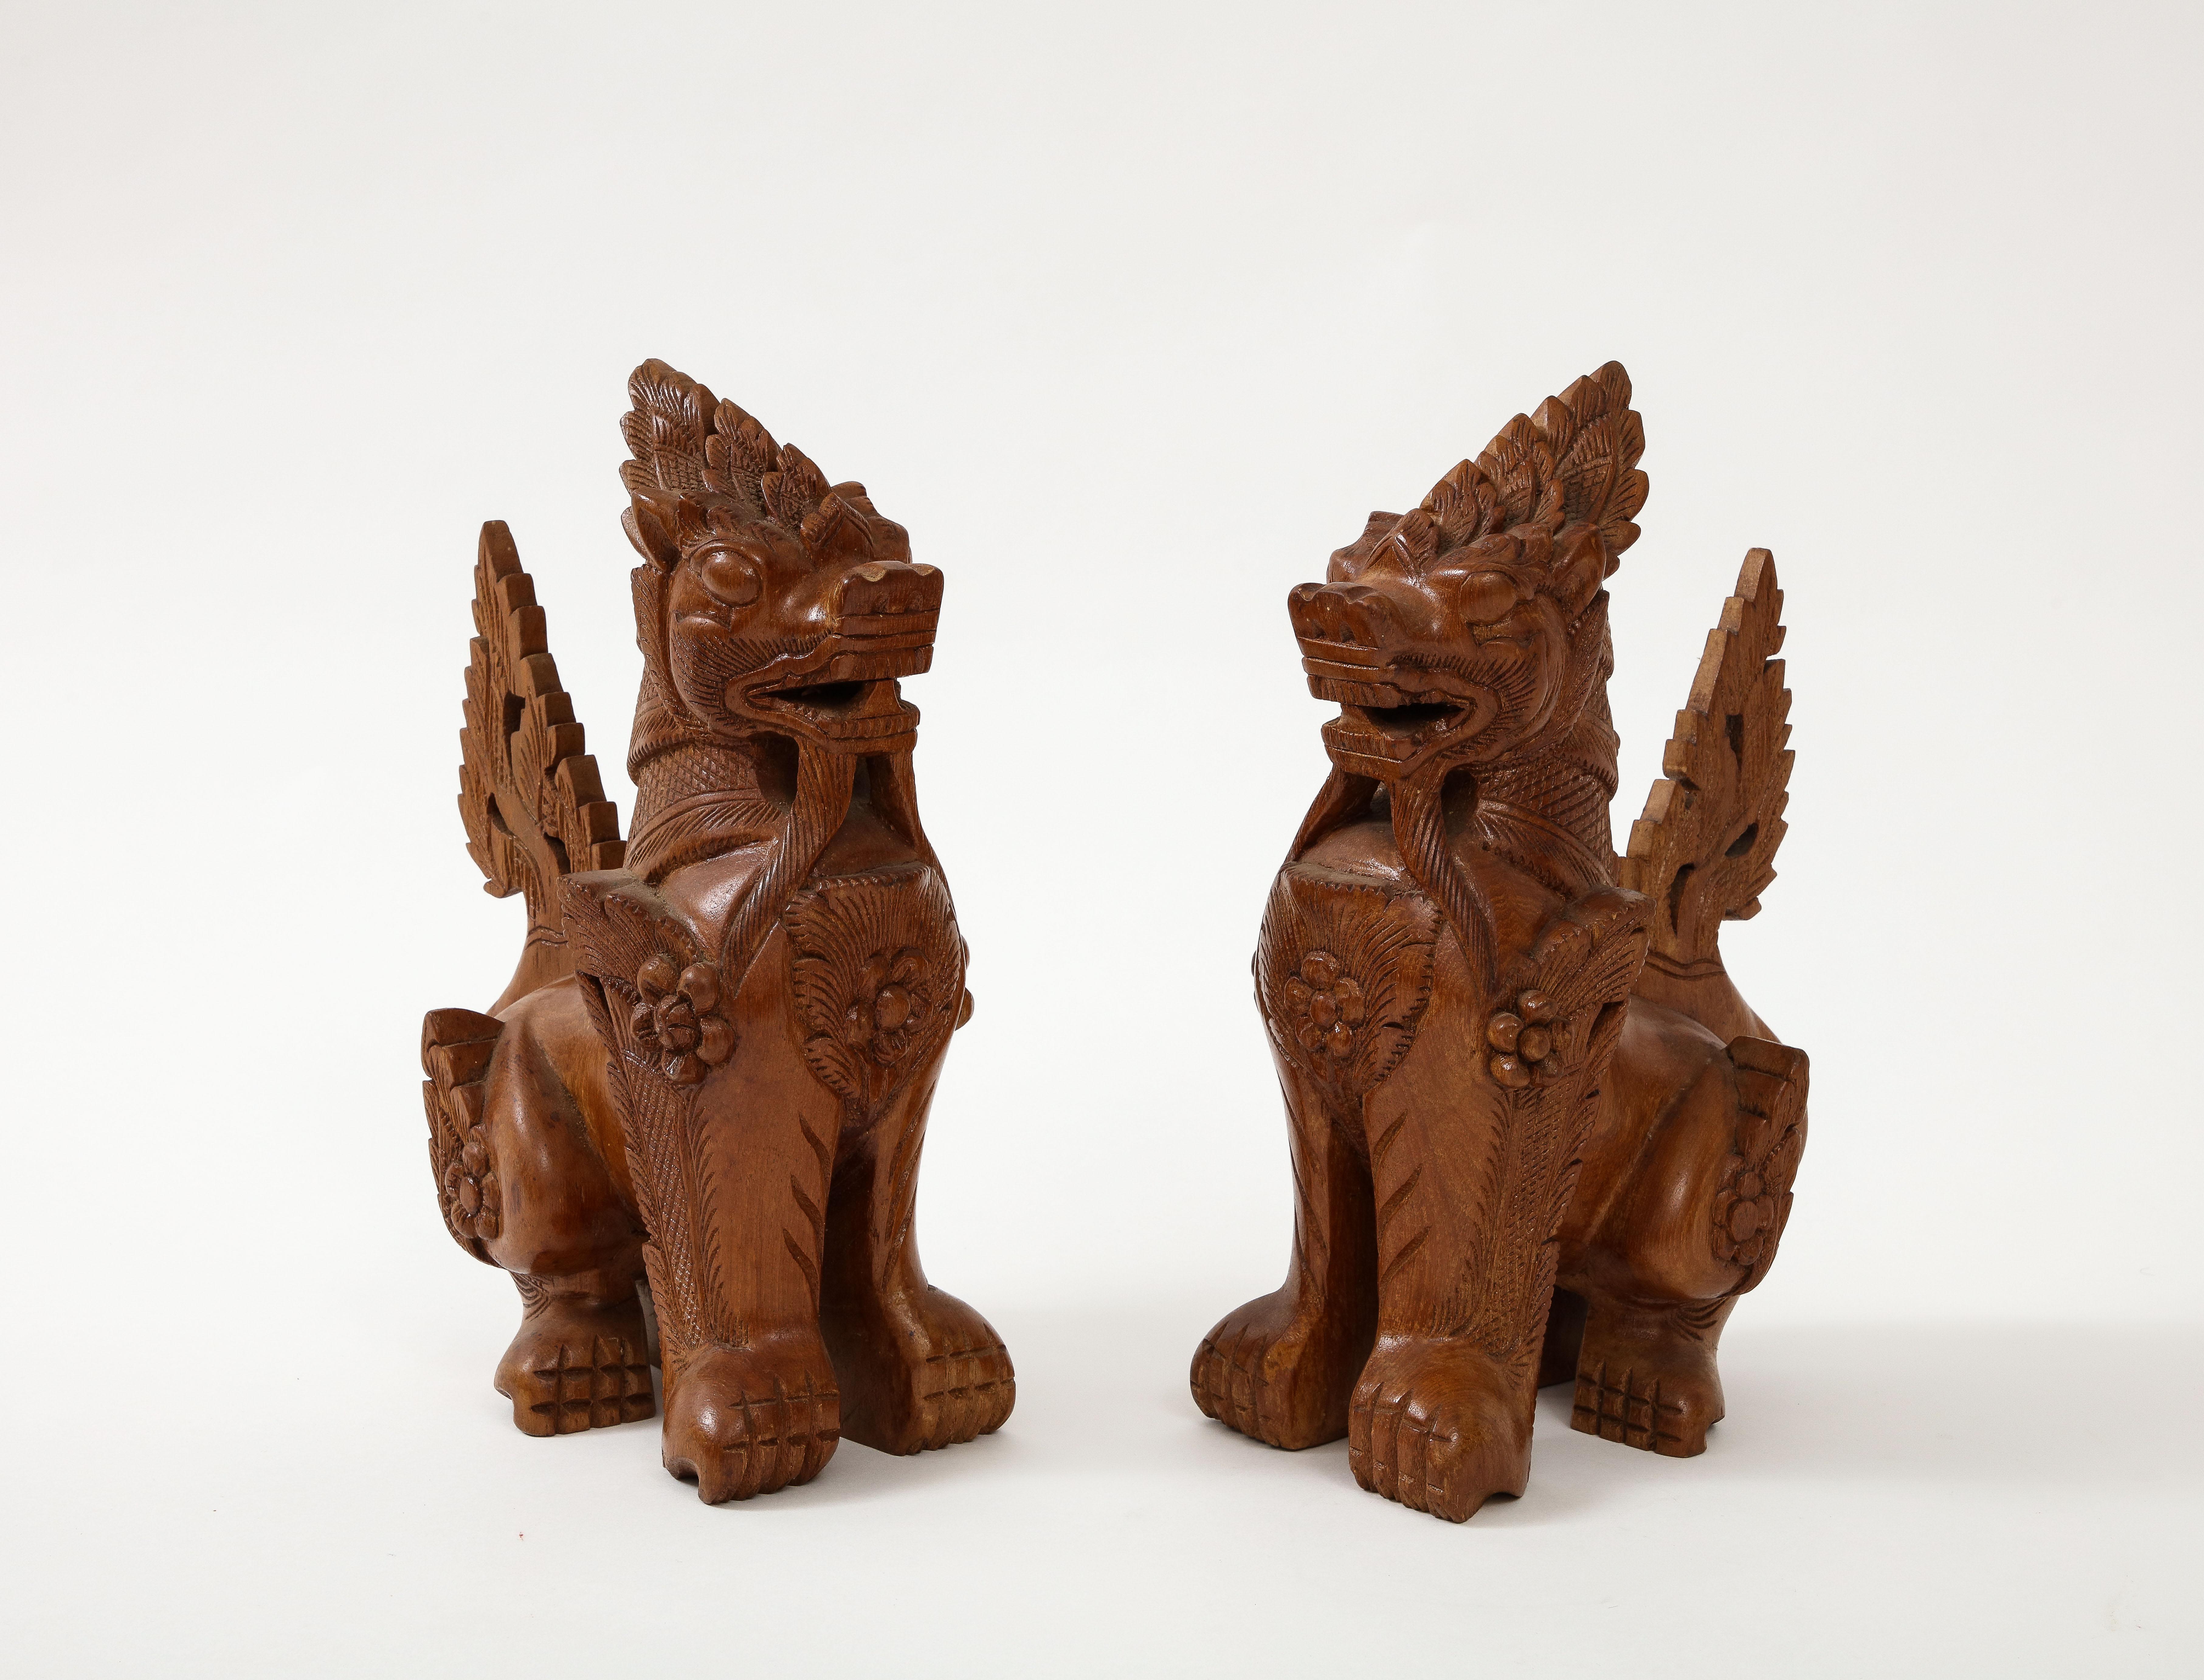 Pair of intricately hand carved Teak temple guard dogs. Foo dogs are symbolic, protective statues, and they are designed in pairs — one is female, the other is male. The female represents yin, and symbolically protects the people dwelling inside the